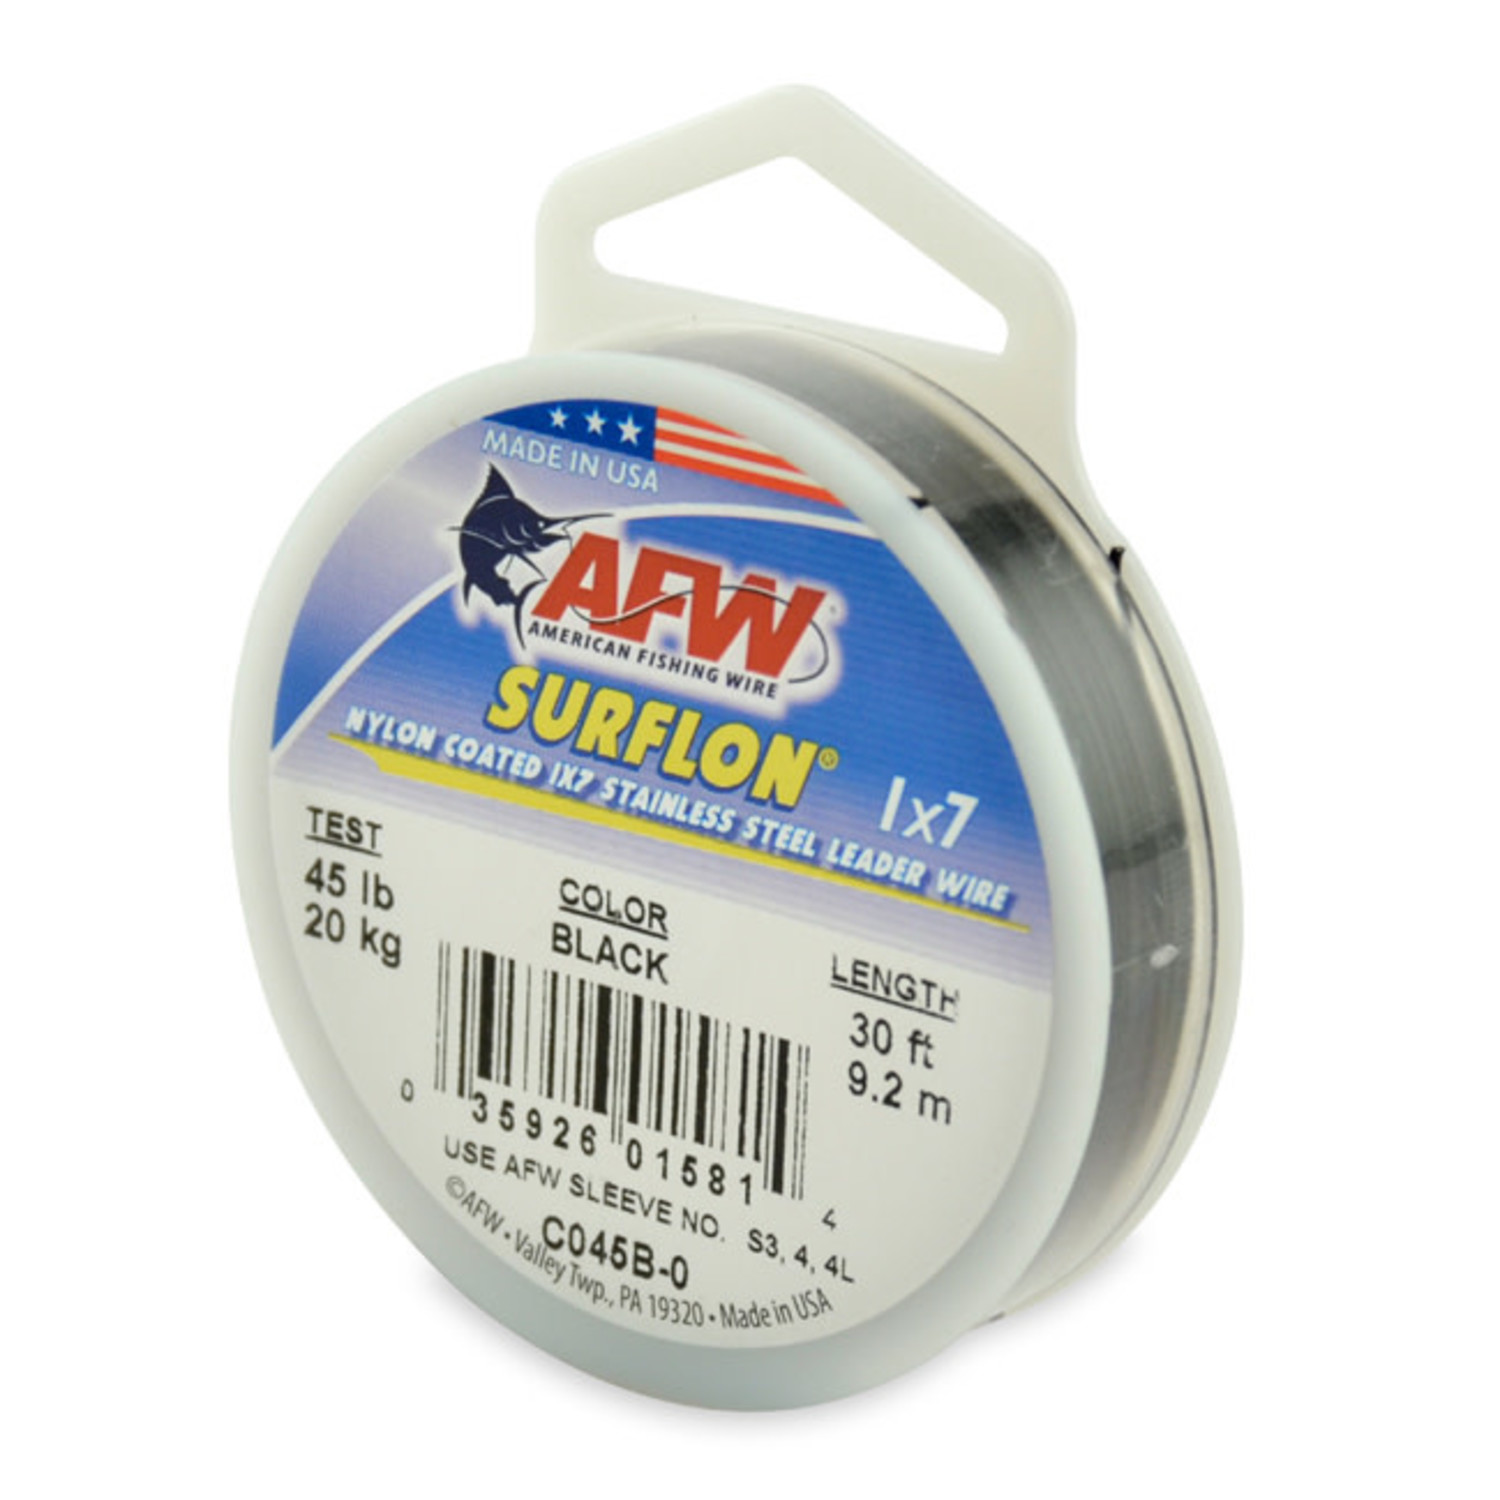 AFW Surflon 1x7 Nylon Coated Stainless Steel Leader Wire - Black